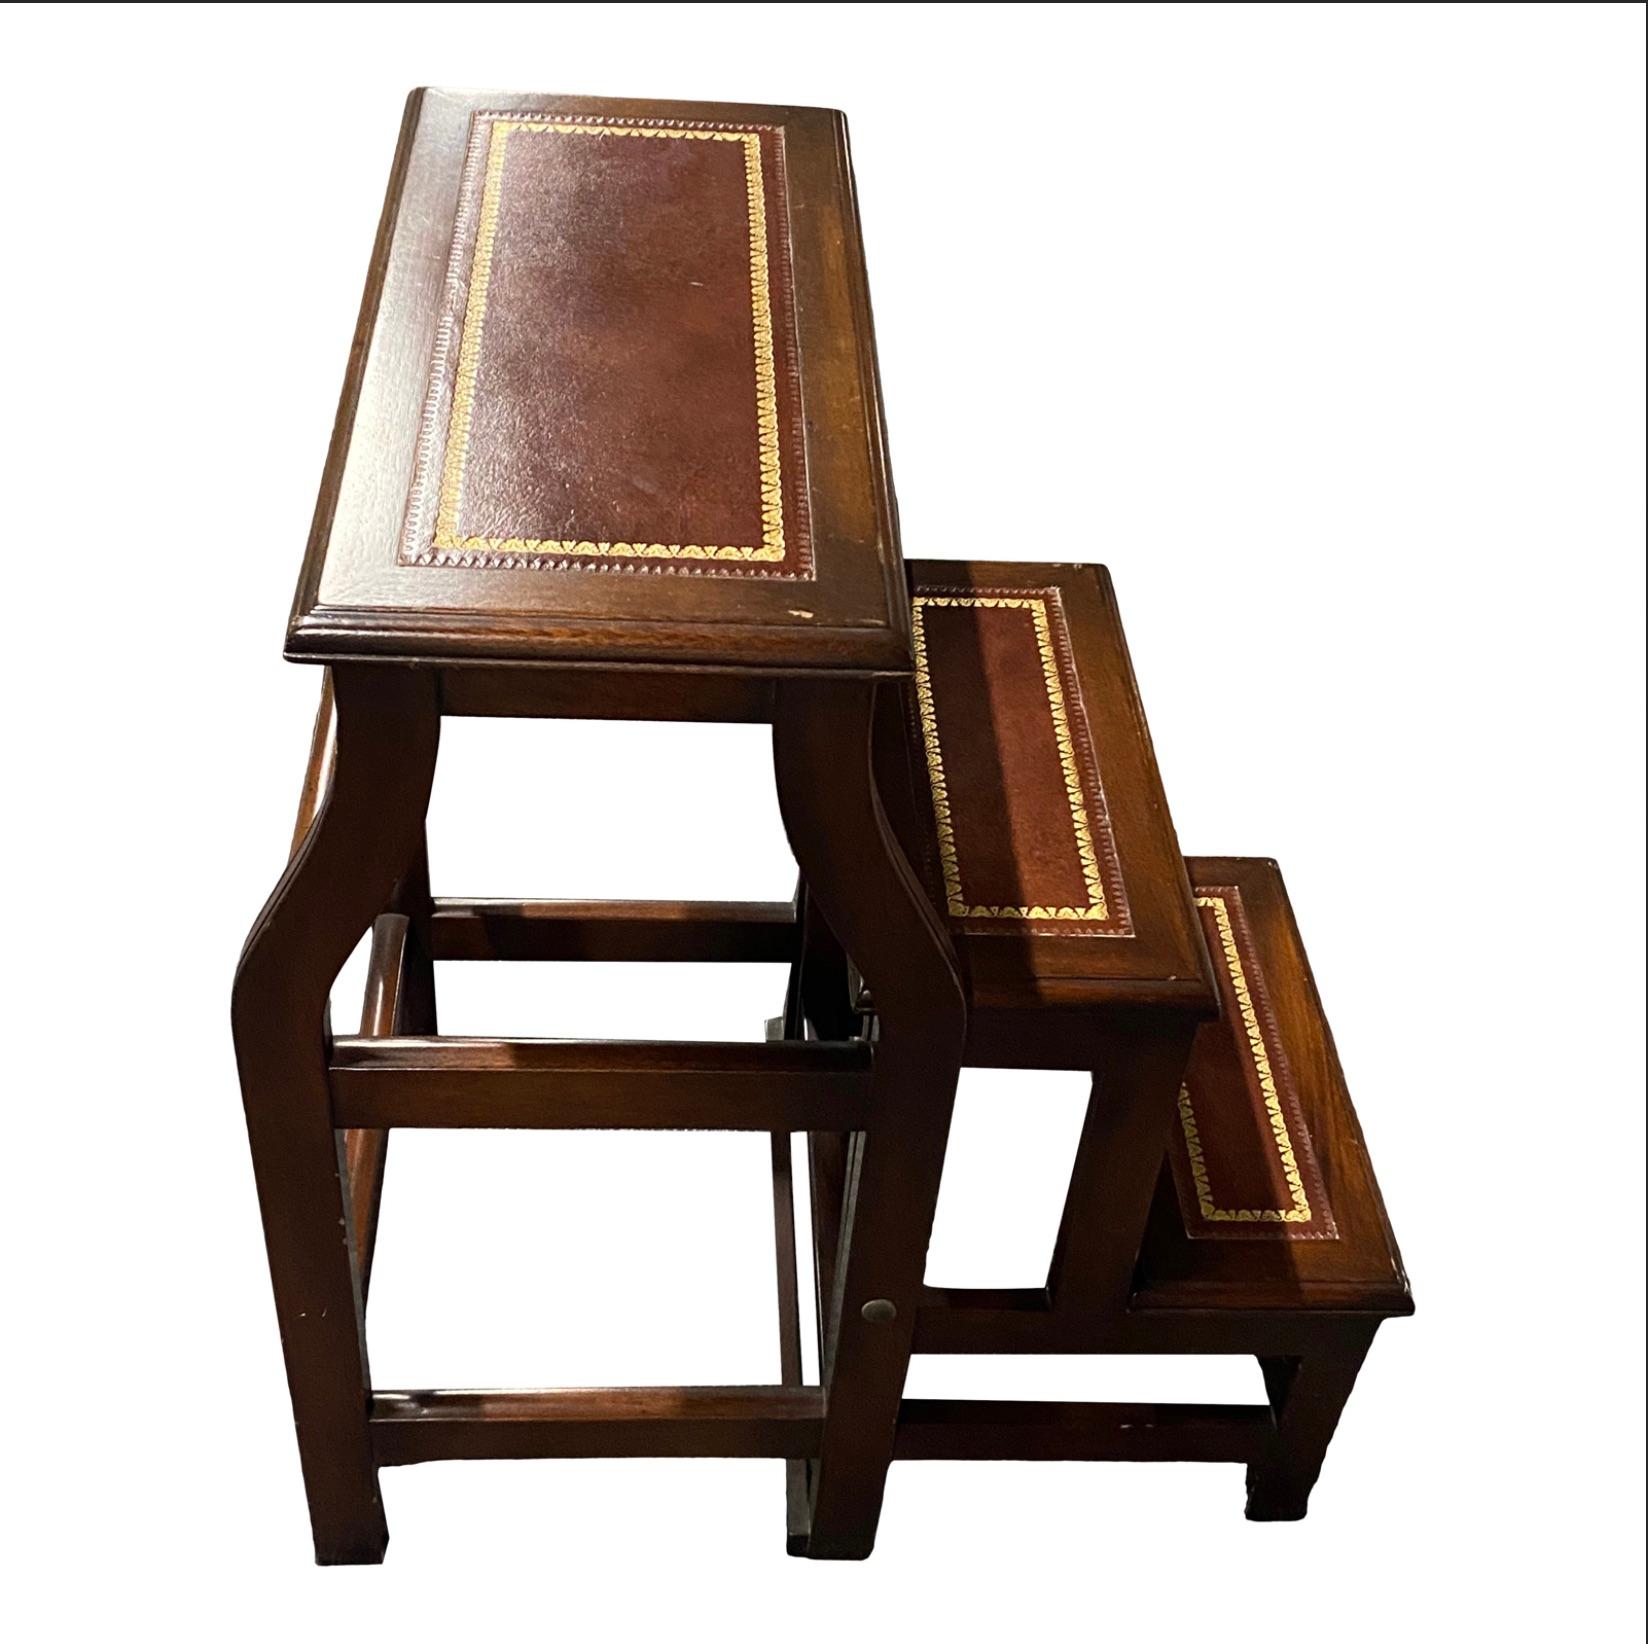 Smith & Watson English Regency Style Stepped Library Stool with Tooled Leather Nesting Steps

24